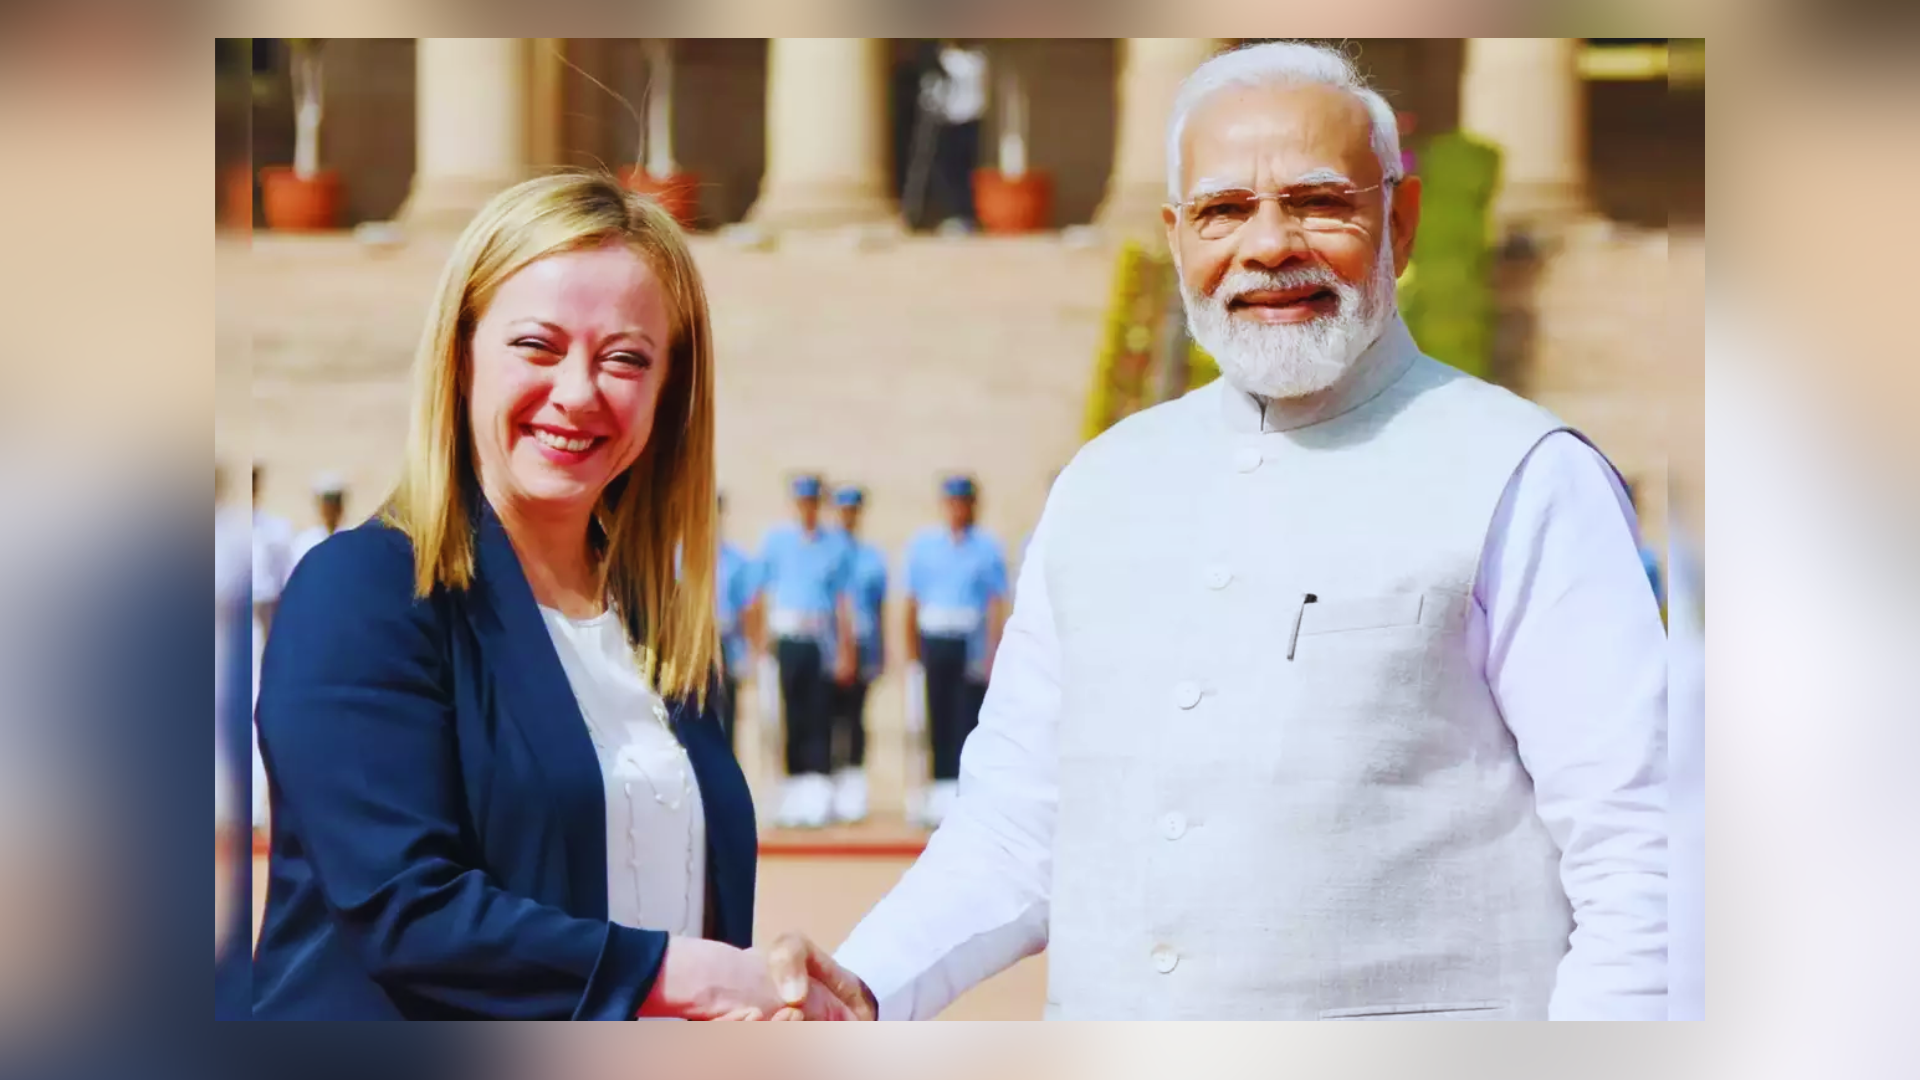 PM Modi Expresses Gratitude To Italian Prime Minister Meloni For G7 Summit Outreach Sessions Invitation During Phone Call